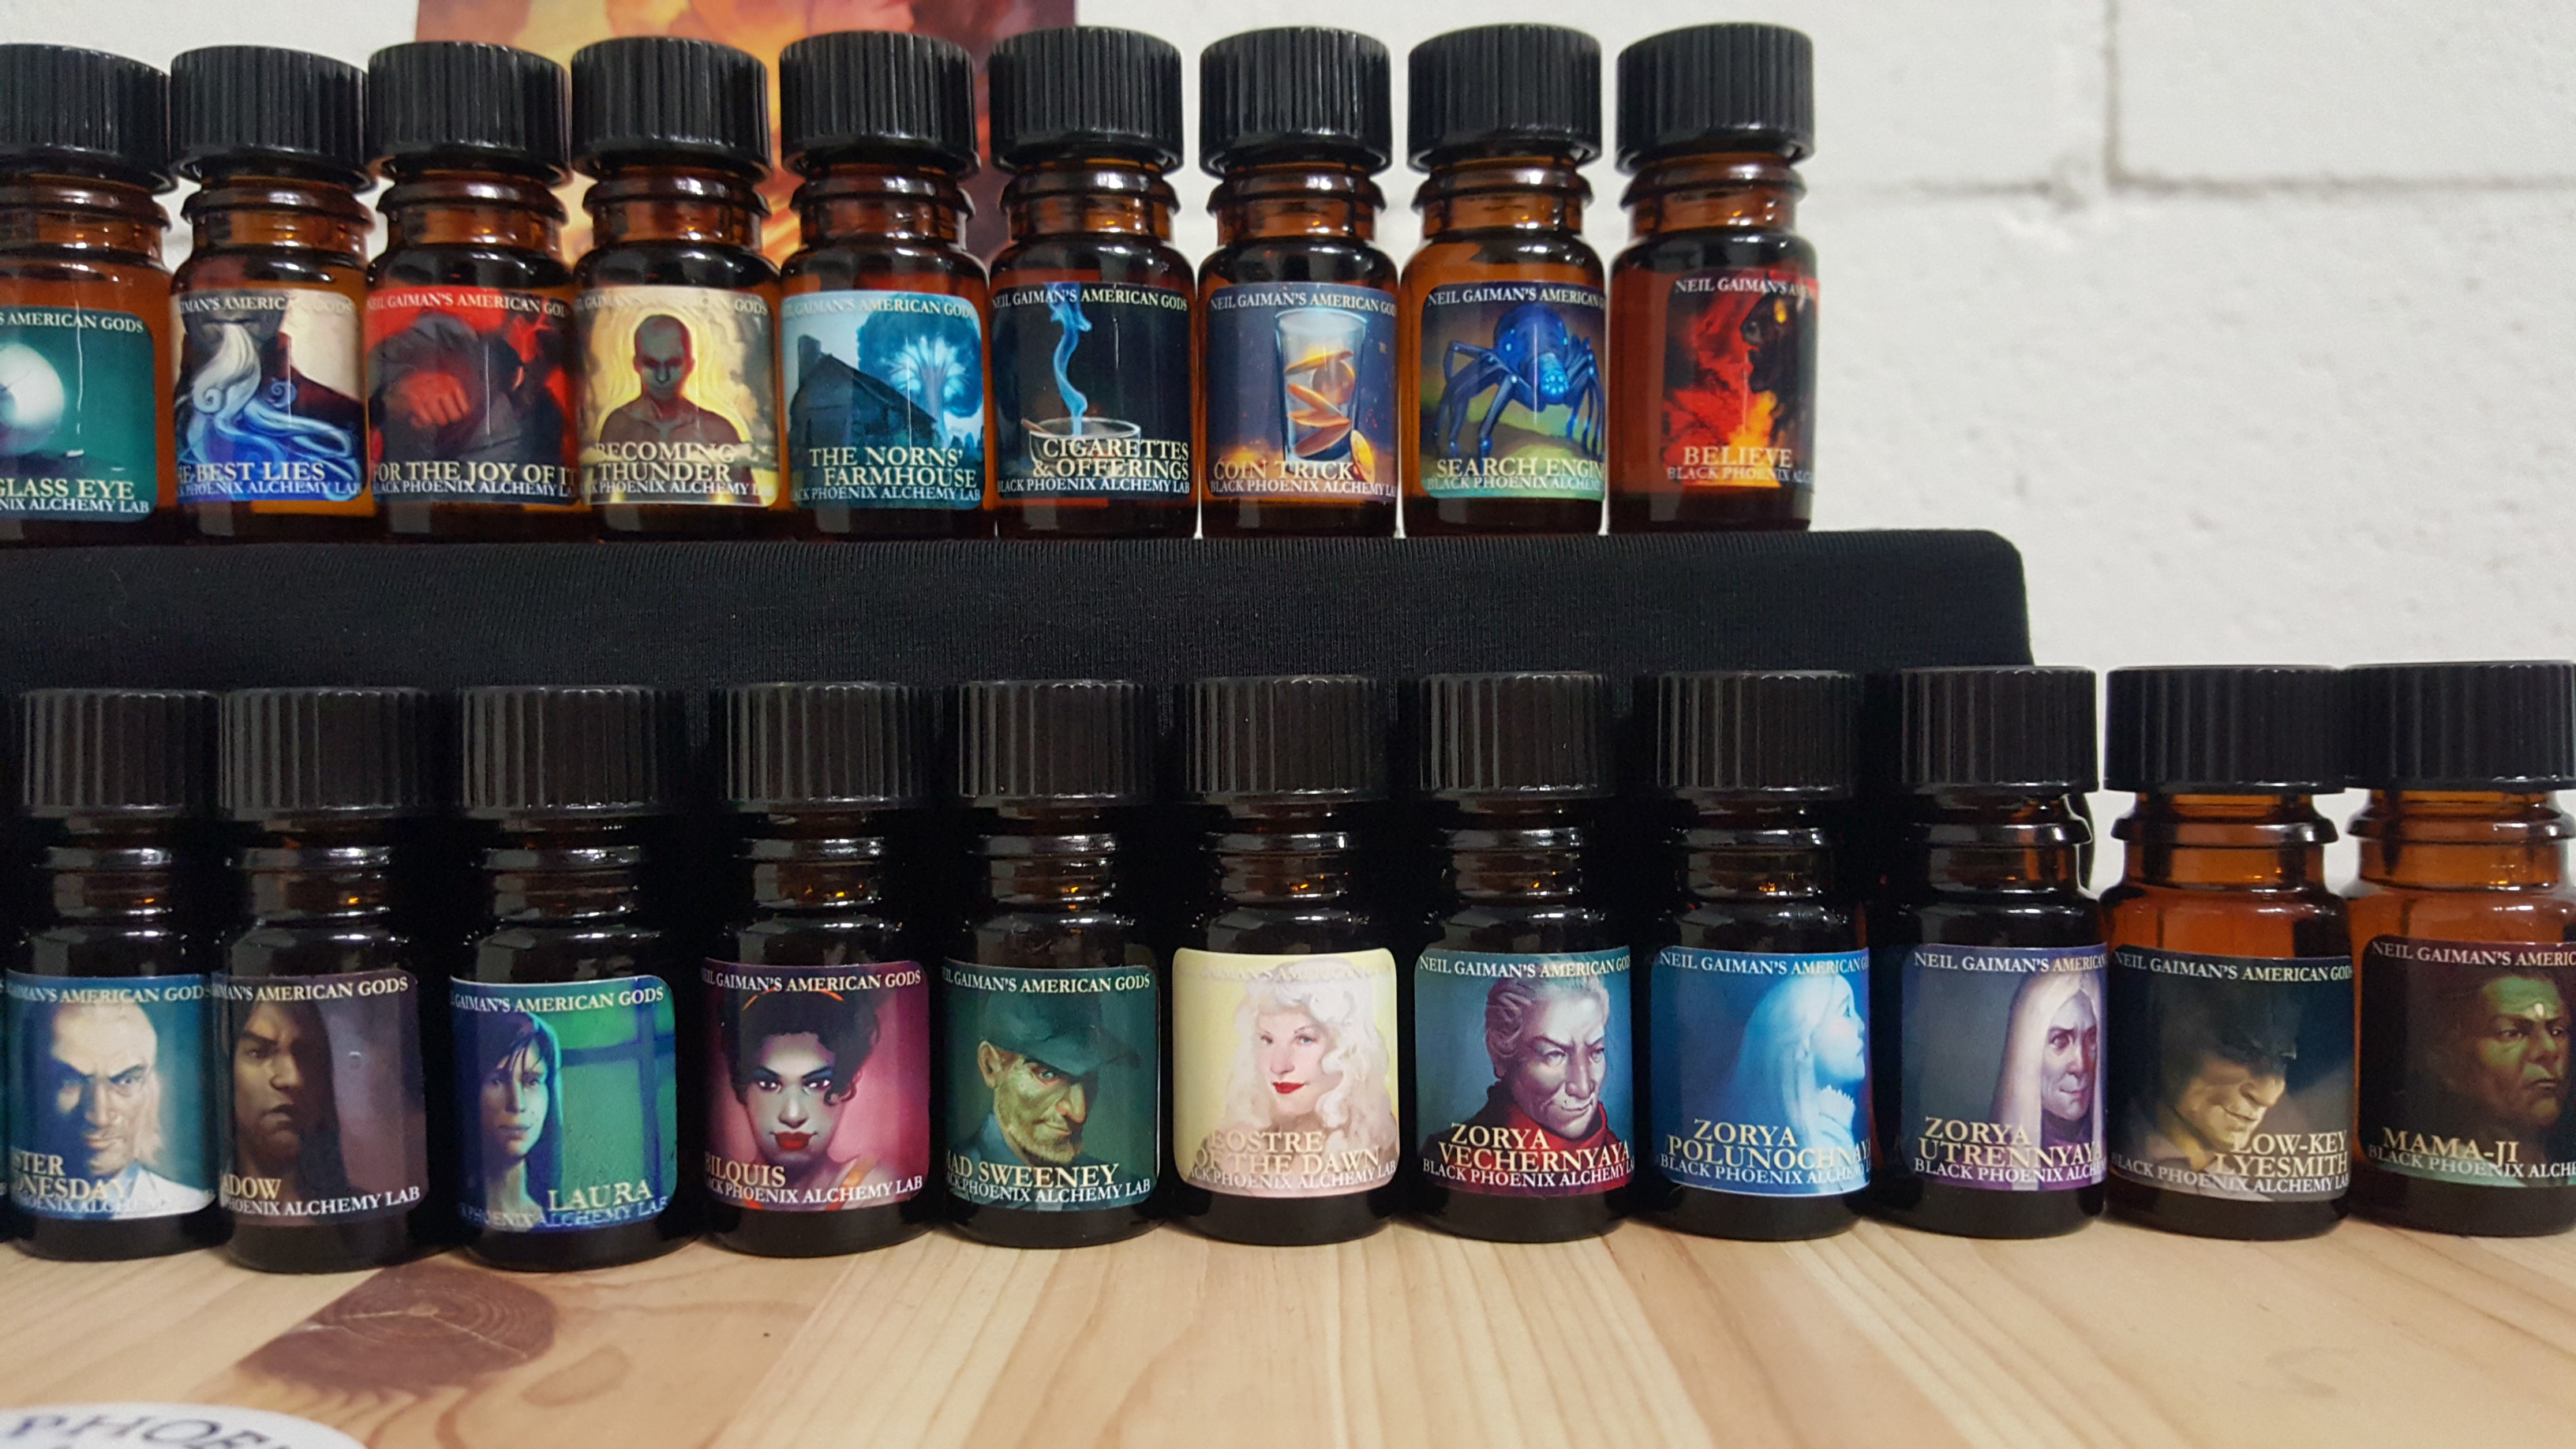 The Daily Crate | 'American Gods' Scents from Black Phoenix Alchemy Lab! WIN A Full Set!